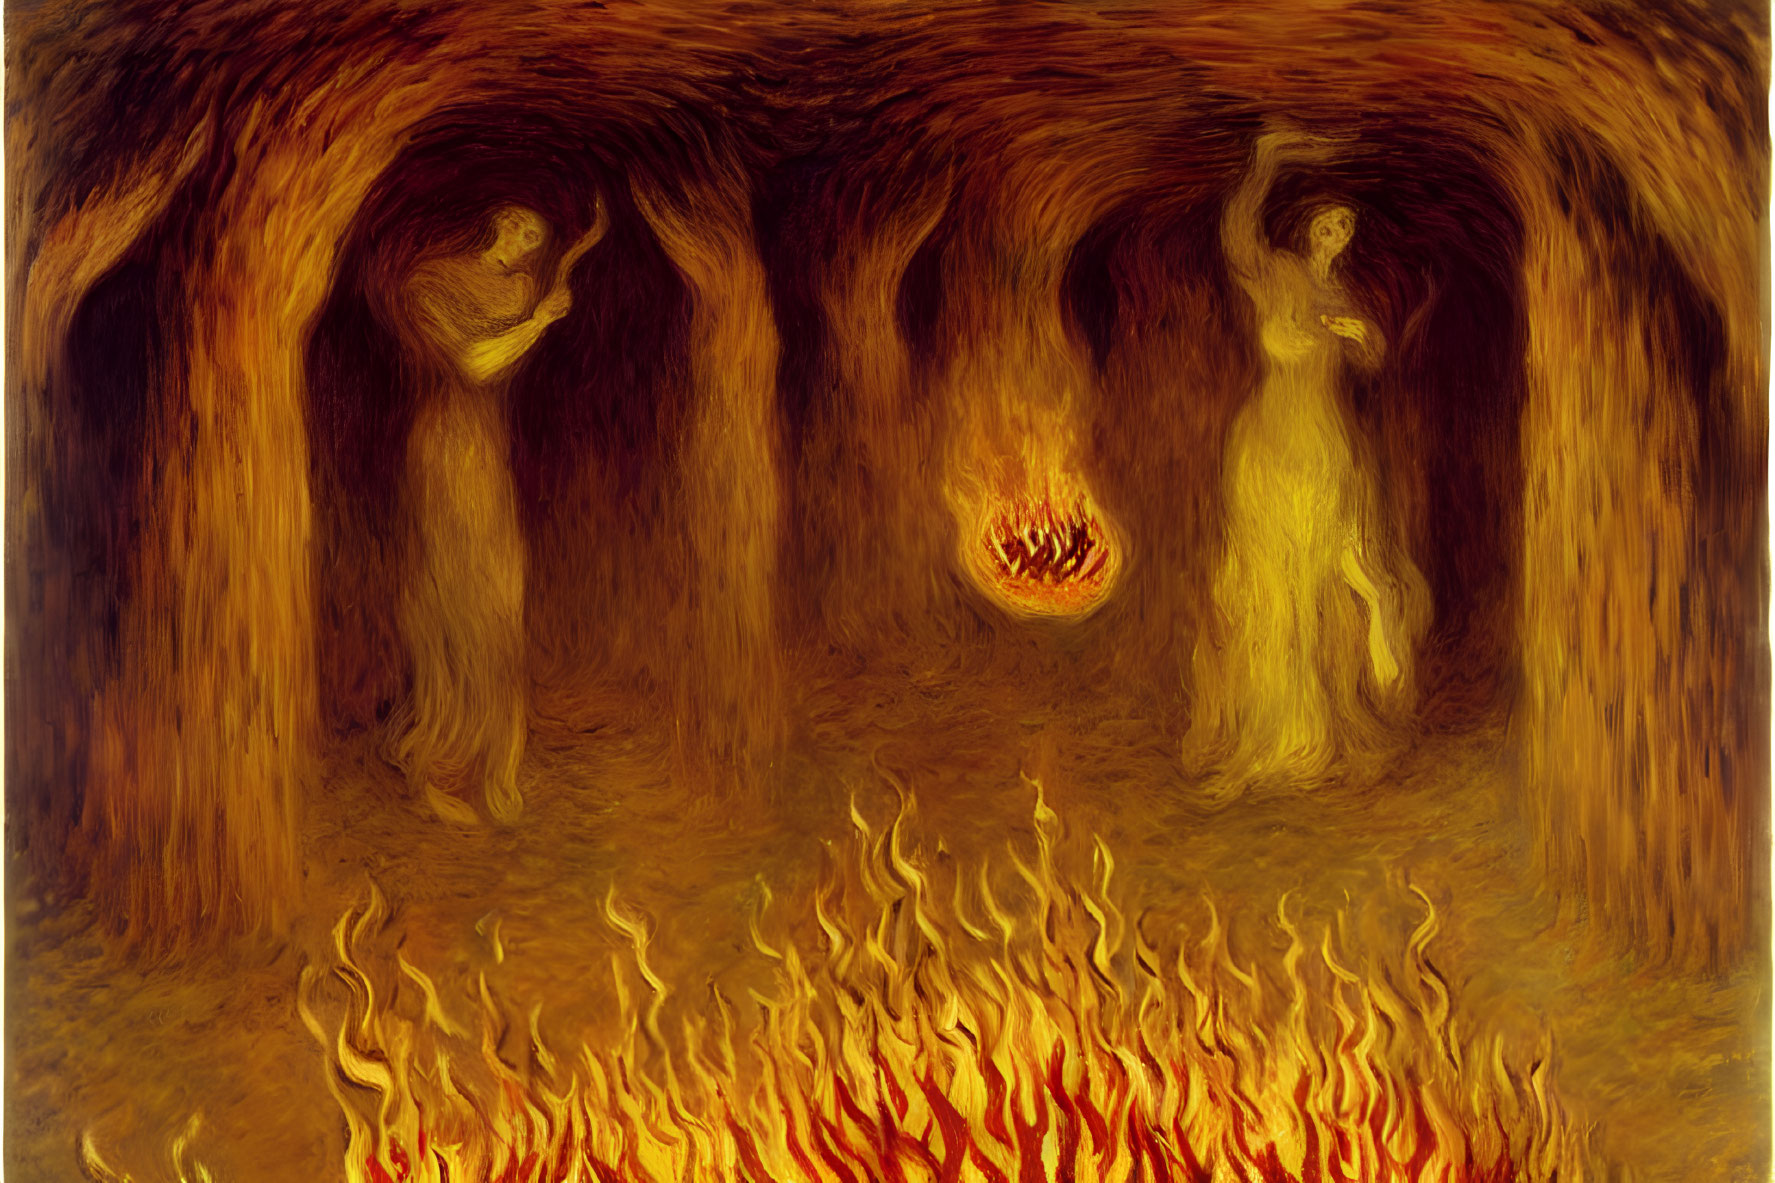 Spooky cave scene with fiery flames and shadowy figures